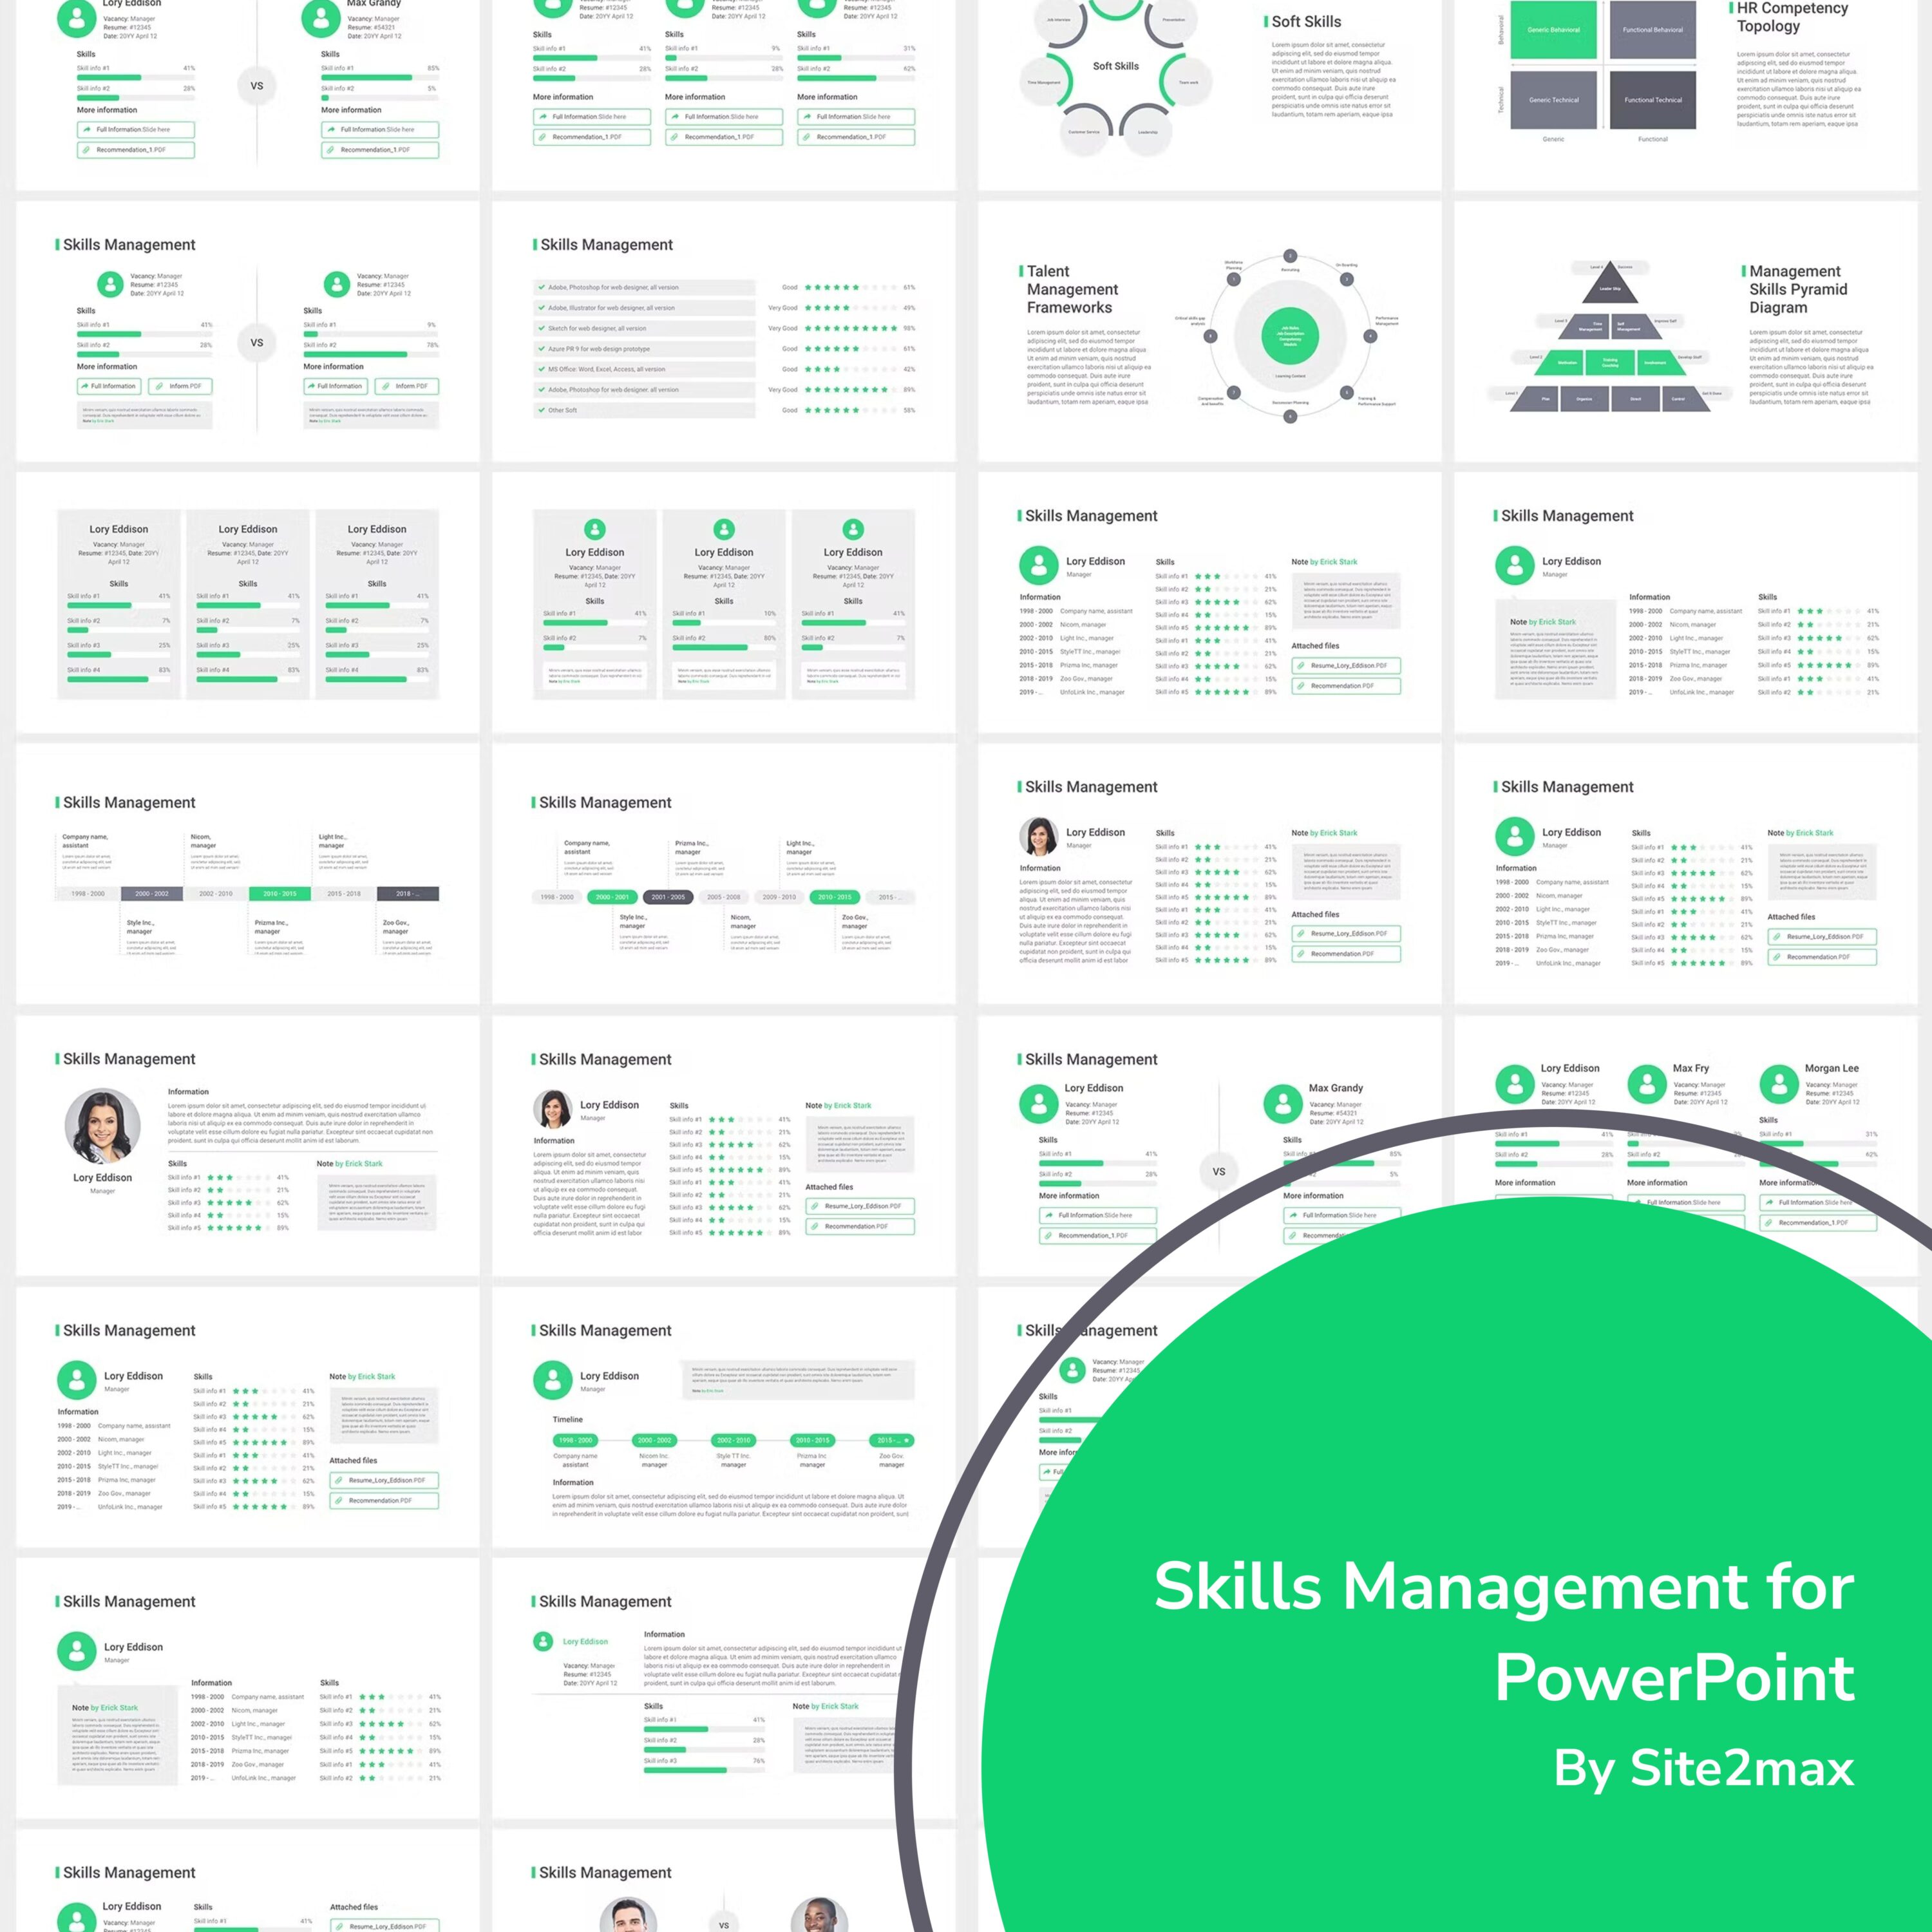 Skills Management for PowerPoint cover.